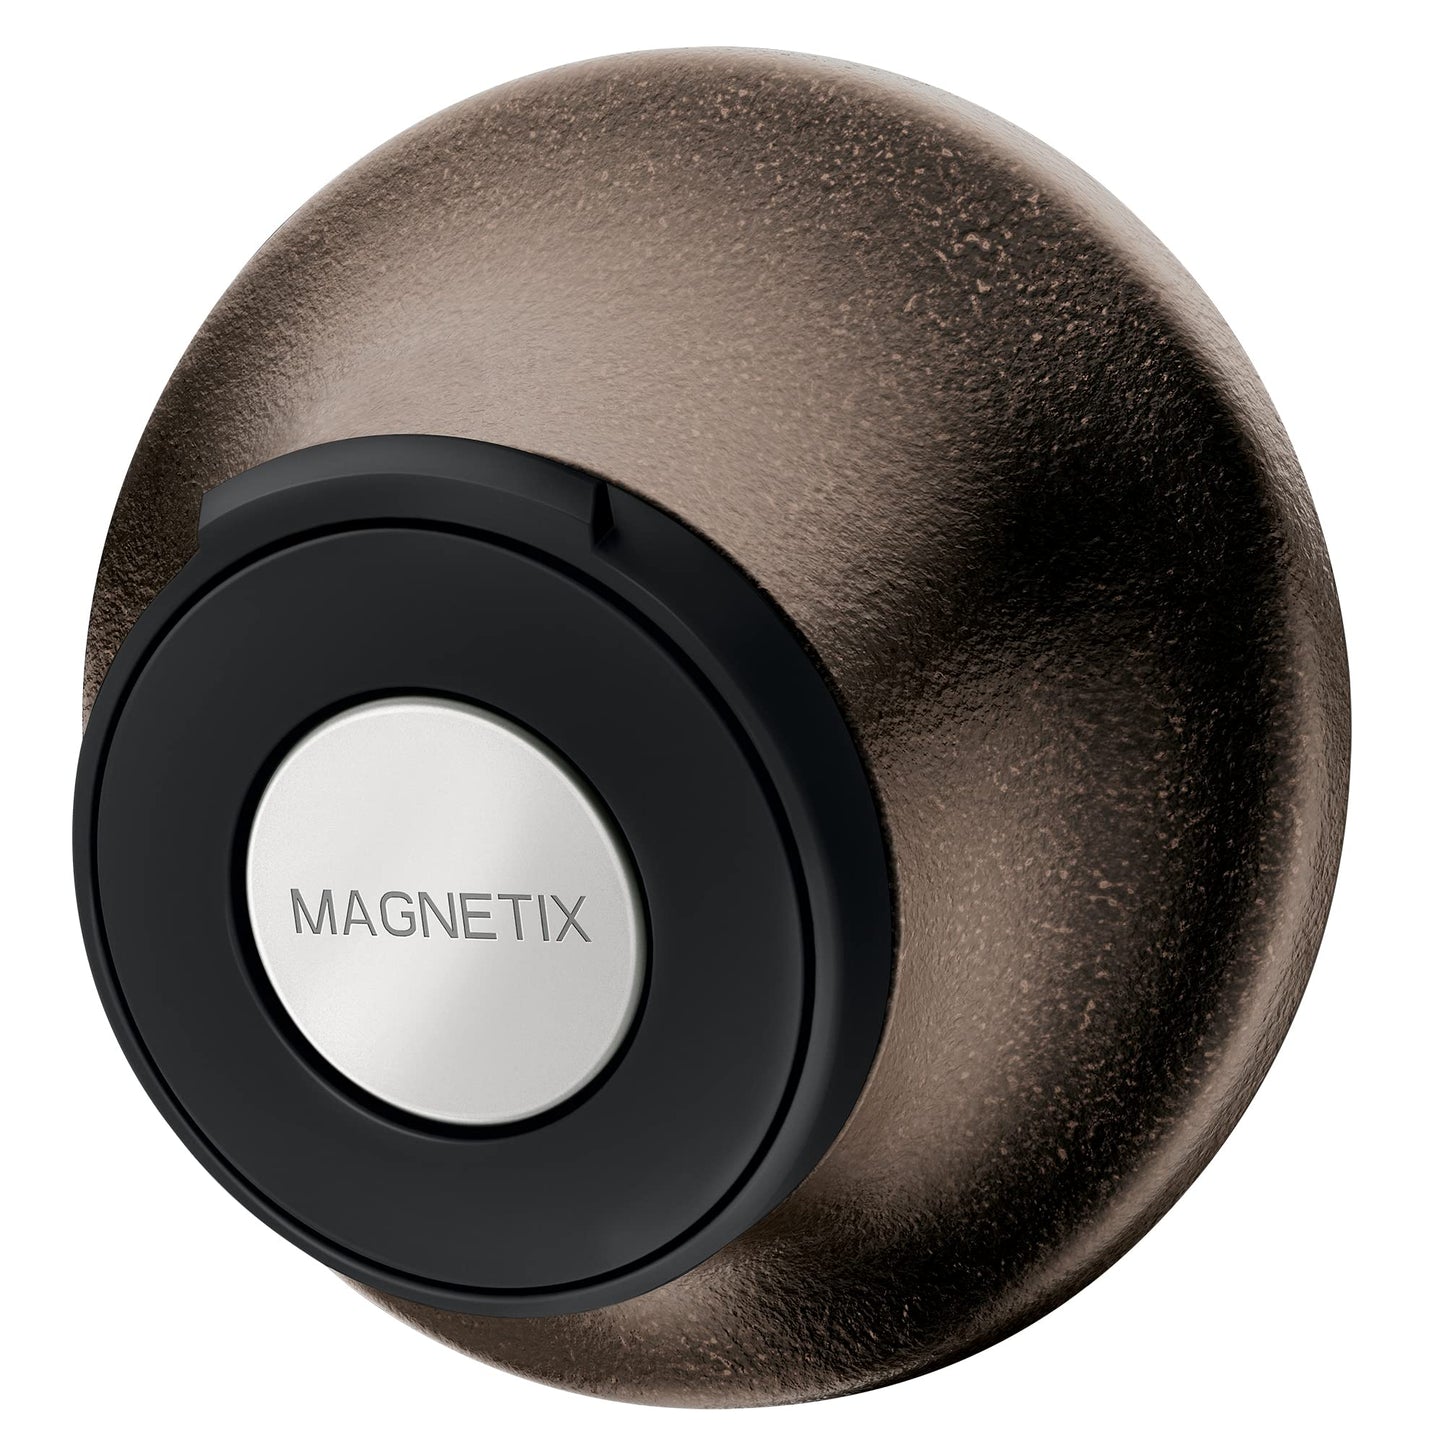 Moen 186117ORB Remote Dock for Magnetix Handshowers with Included Wall Bracket or Permanent Waterproof Adhesive Options, Oil Rubbed Bronze